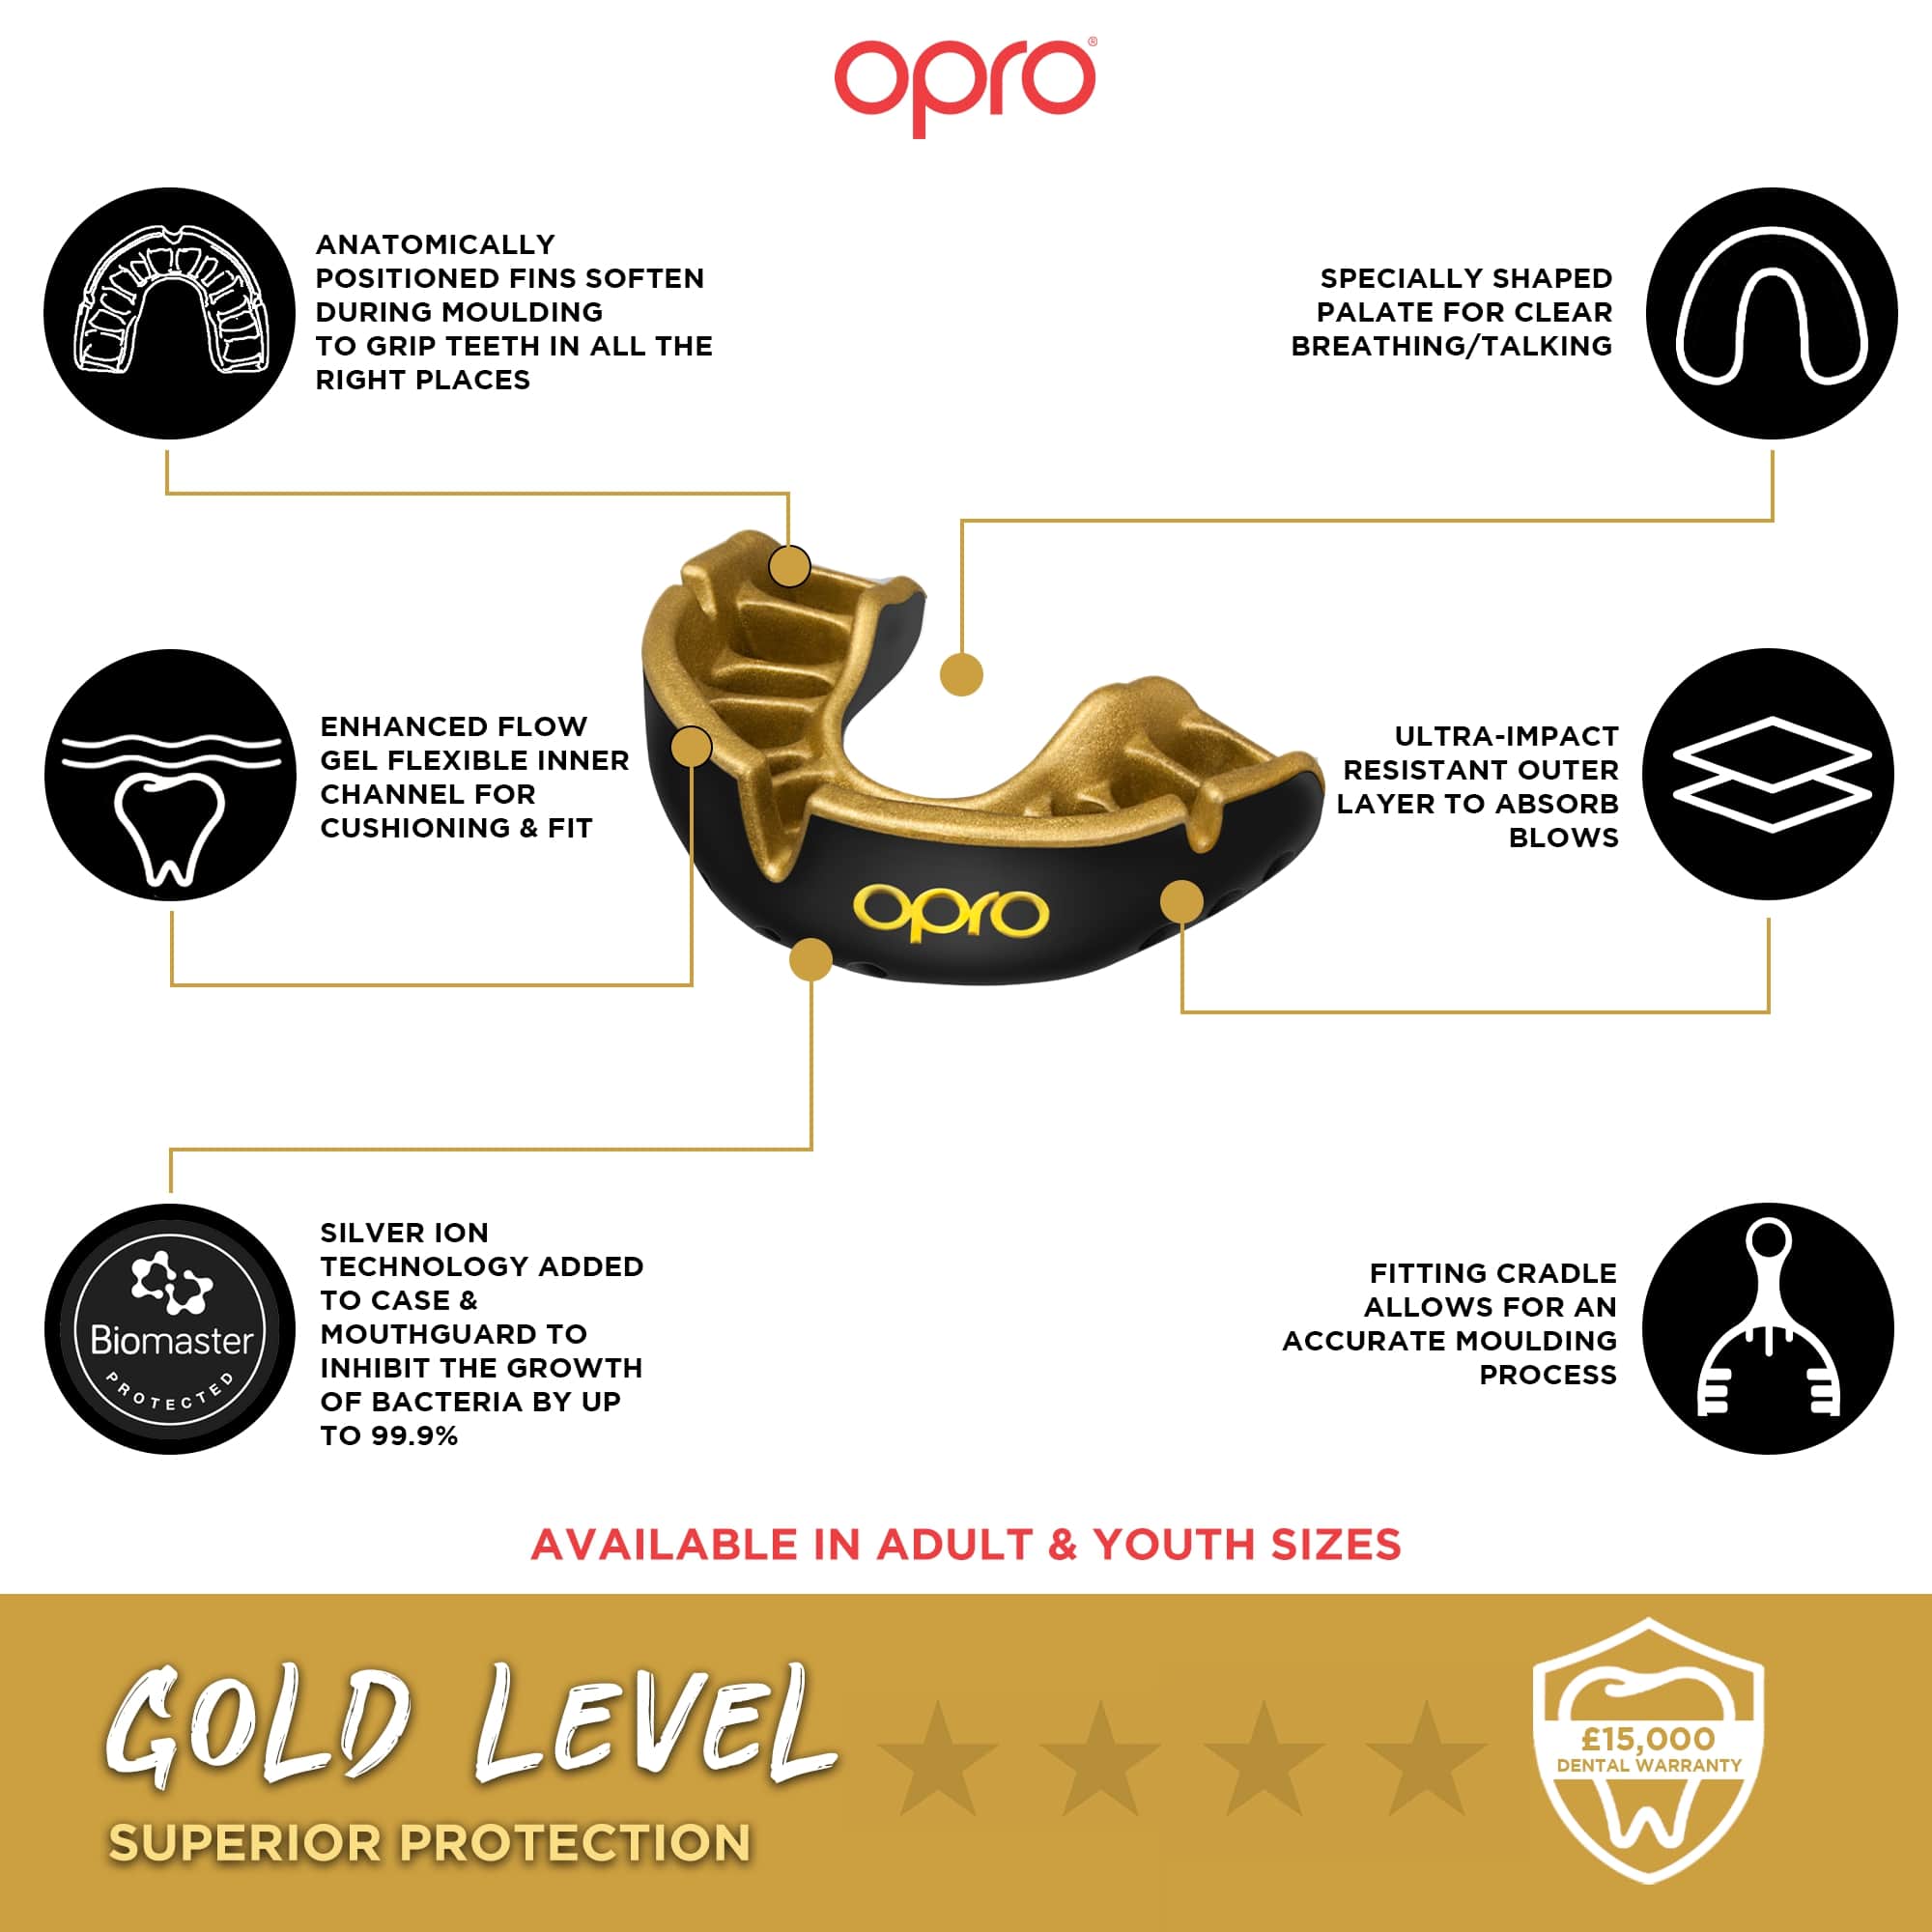 adidas OPRO Gold Gum Shield Boxing Sports Mouth Guard